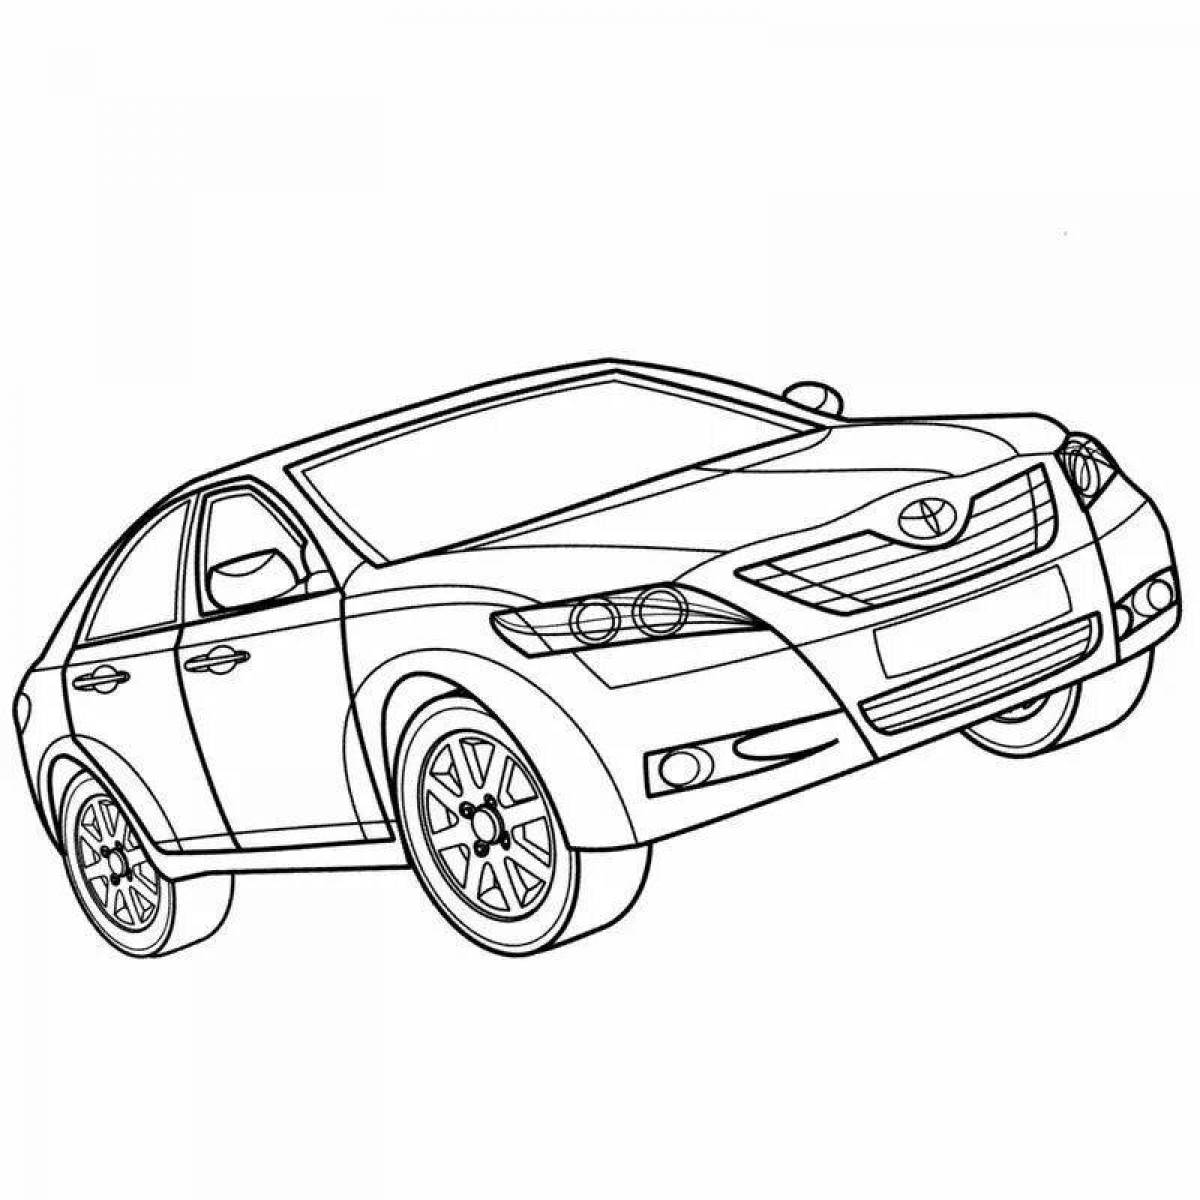 Coloring energetic camry